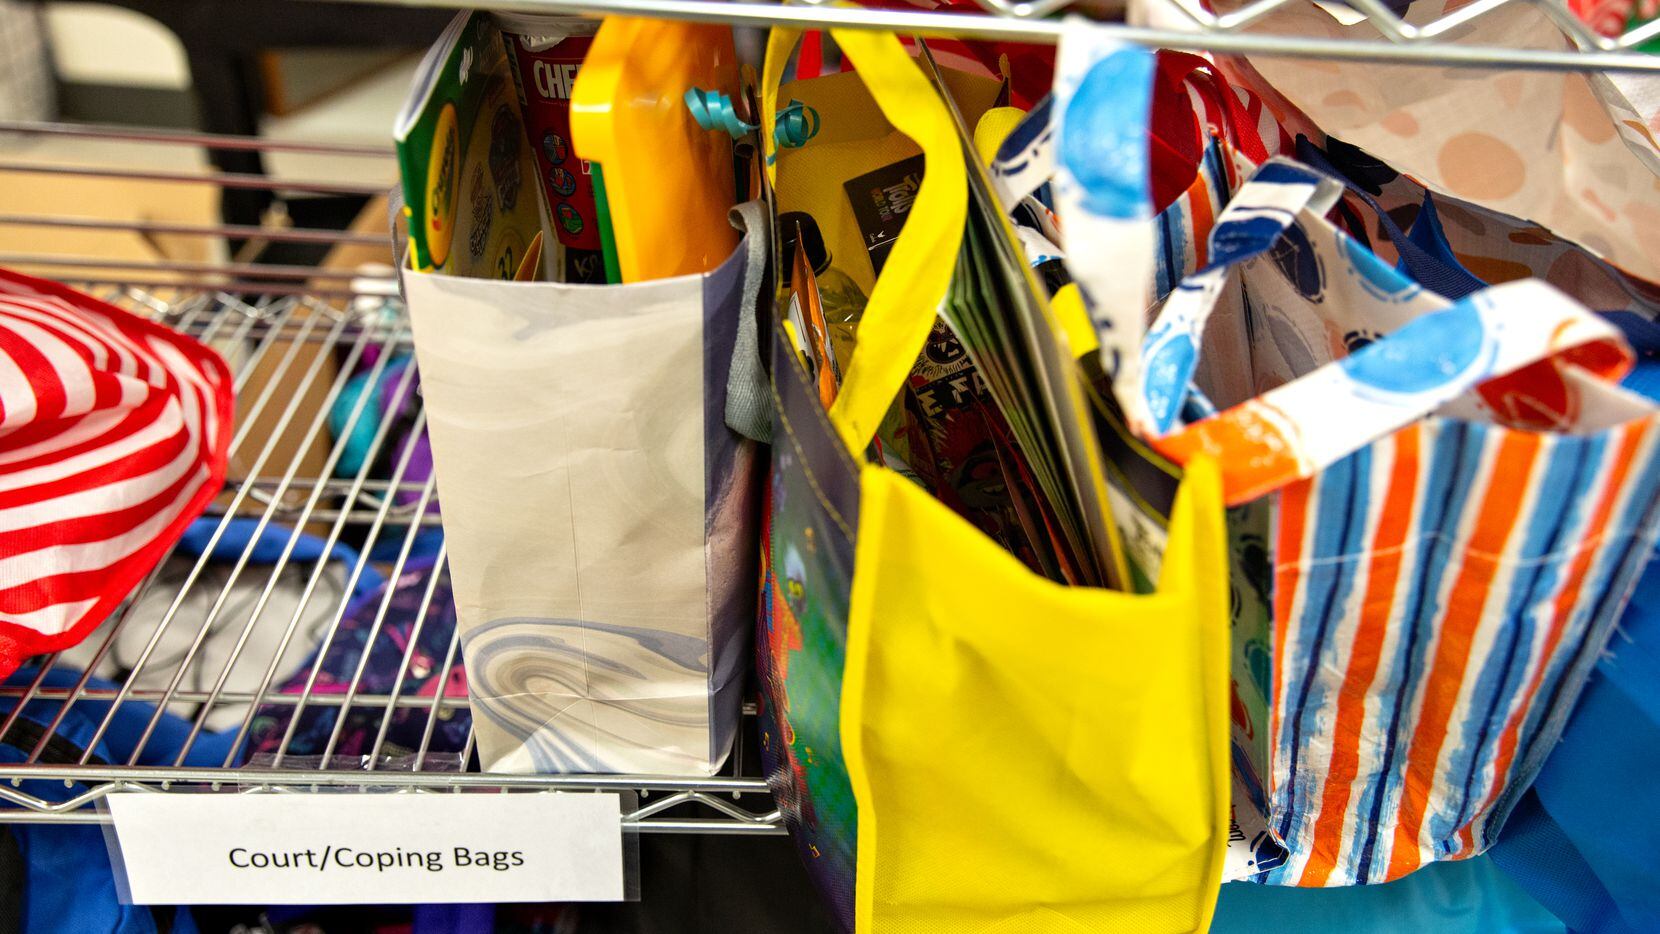 Amid a supply closet filled with clothes and toys, a shelf of "court/coping bags" is a stark...